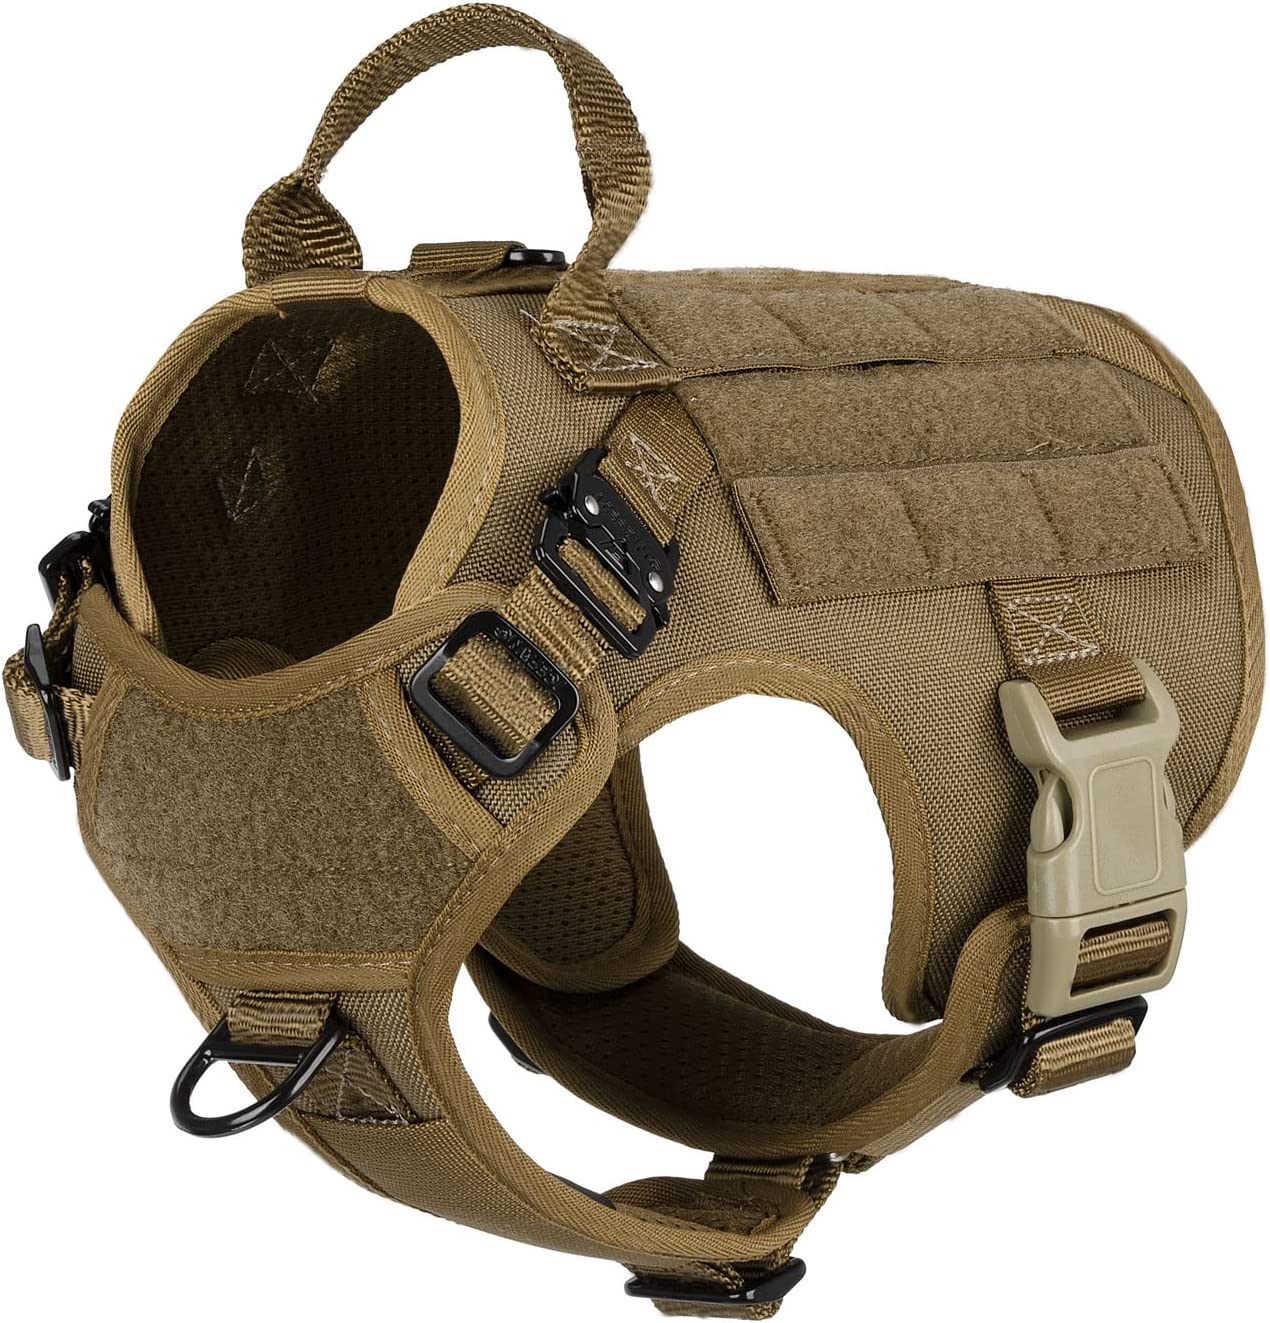 icefang tactical harness